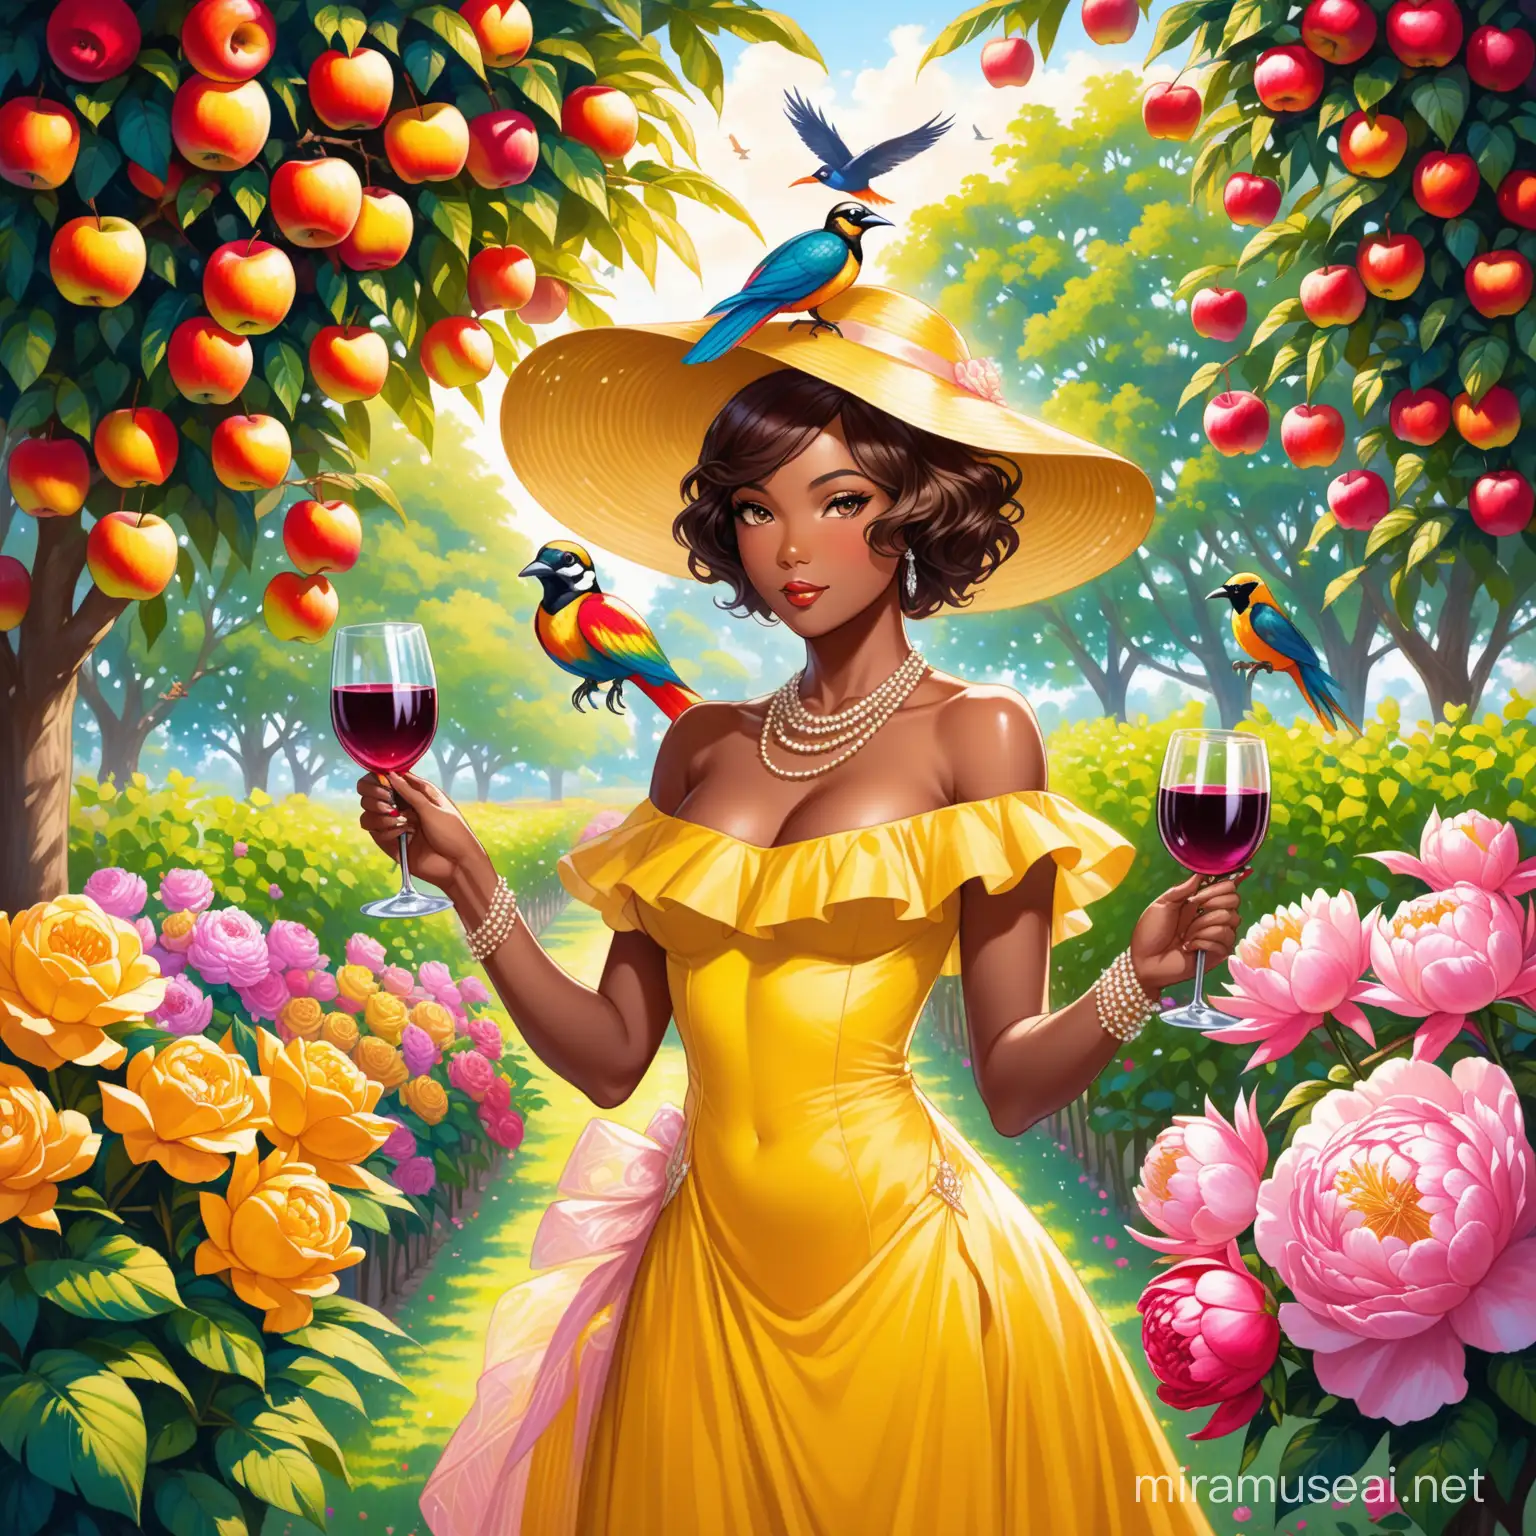 African American Lady in Yellow Great Gatsby Dress Painting Black People in Garden with Apple Trees and Flowers